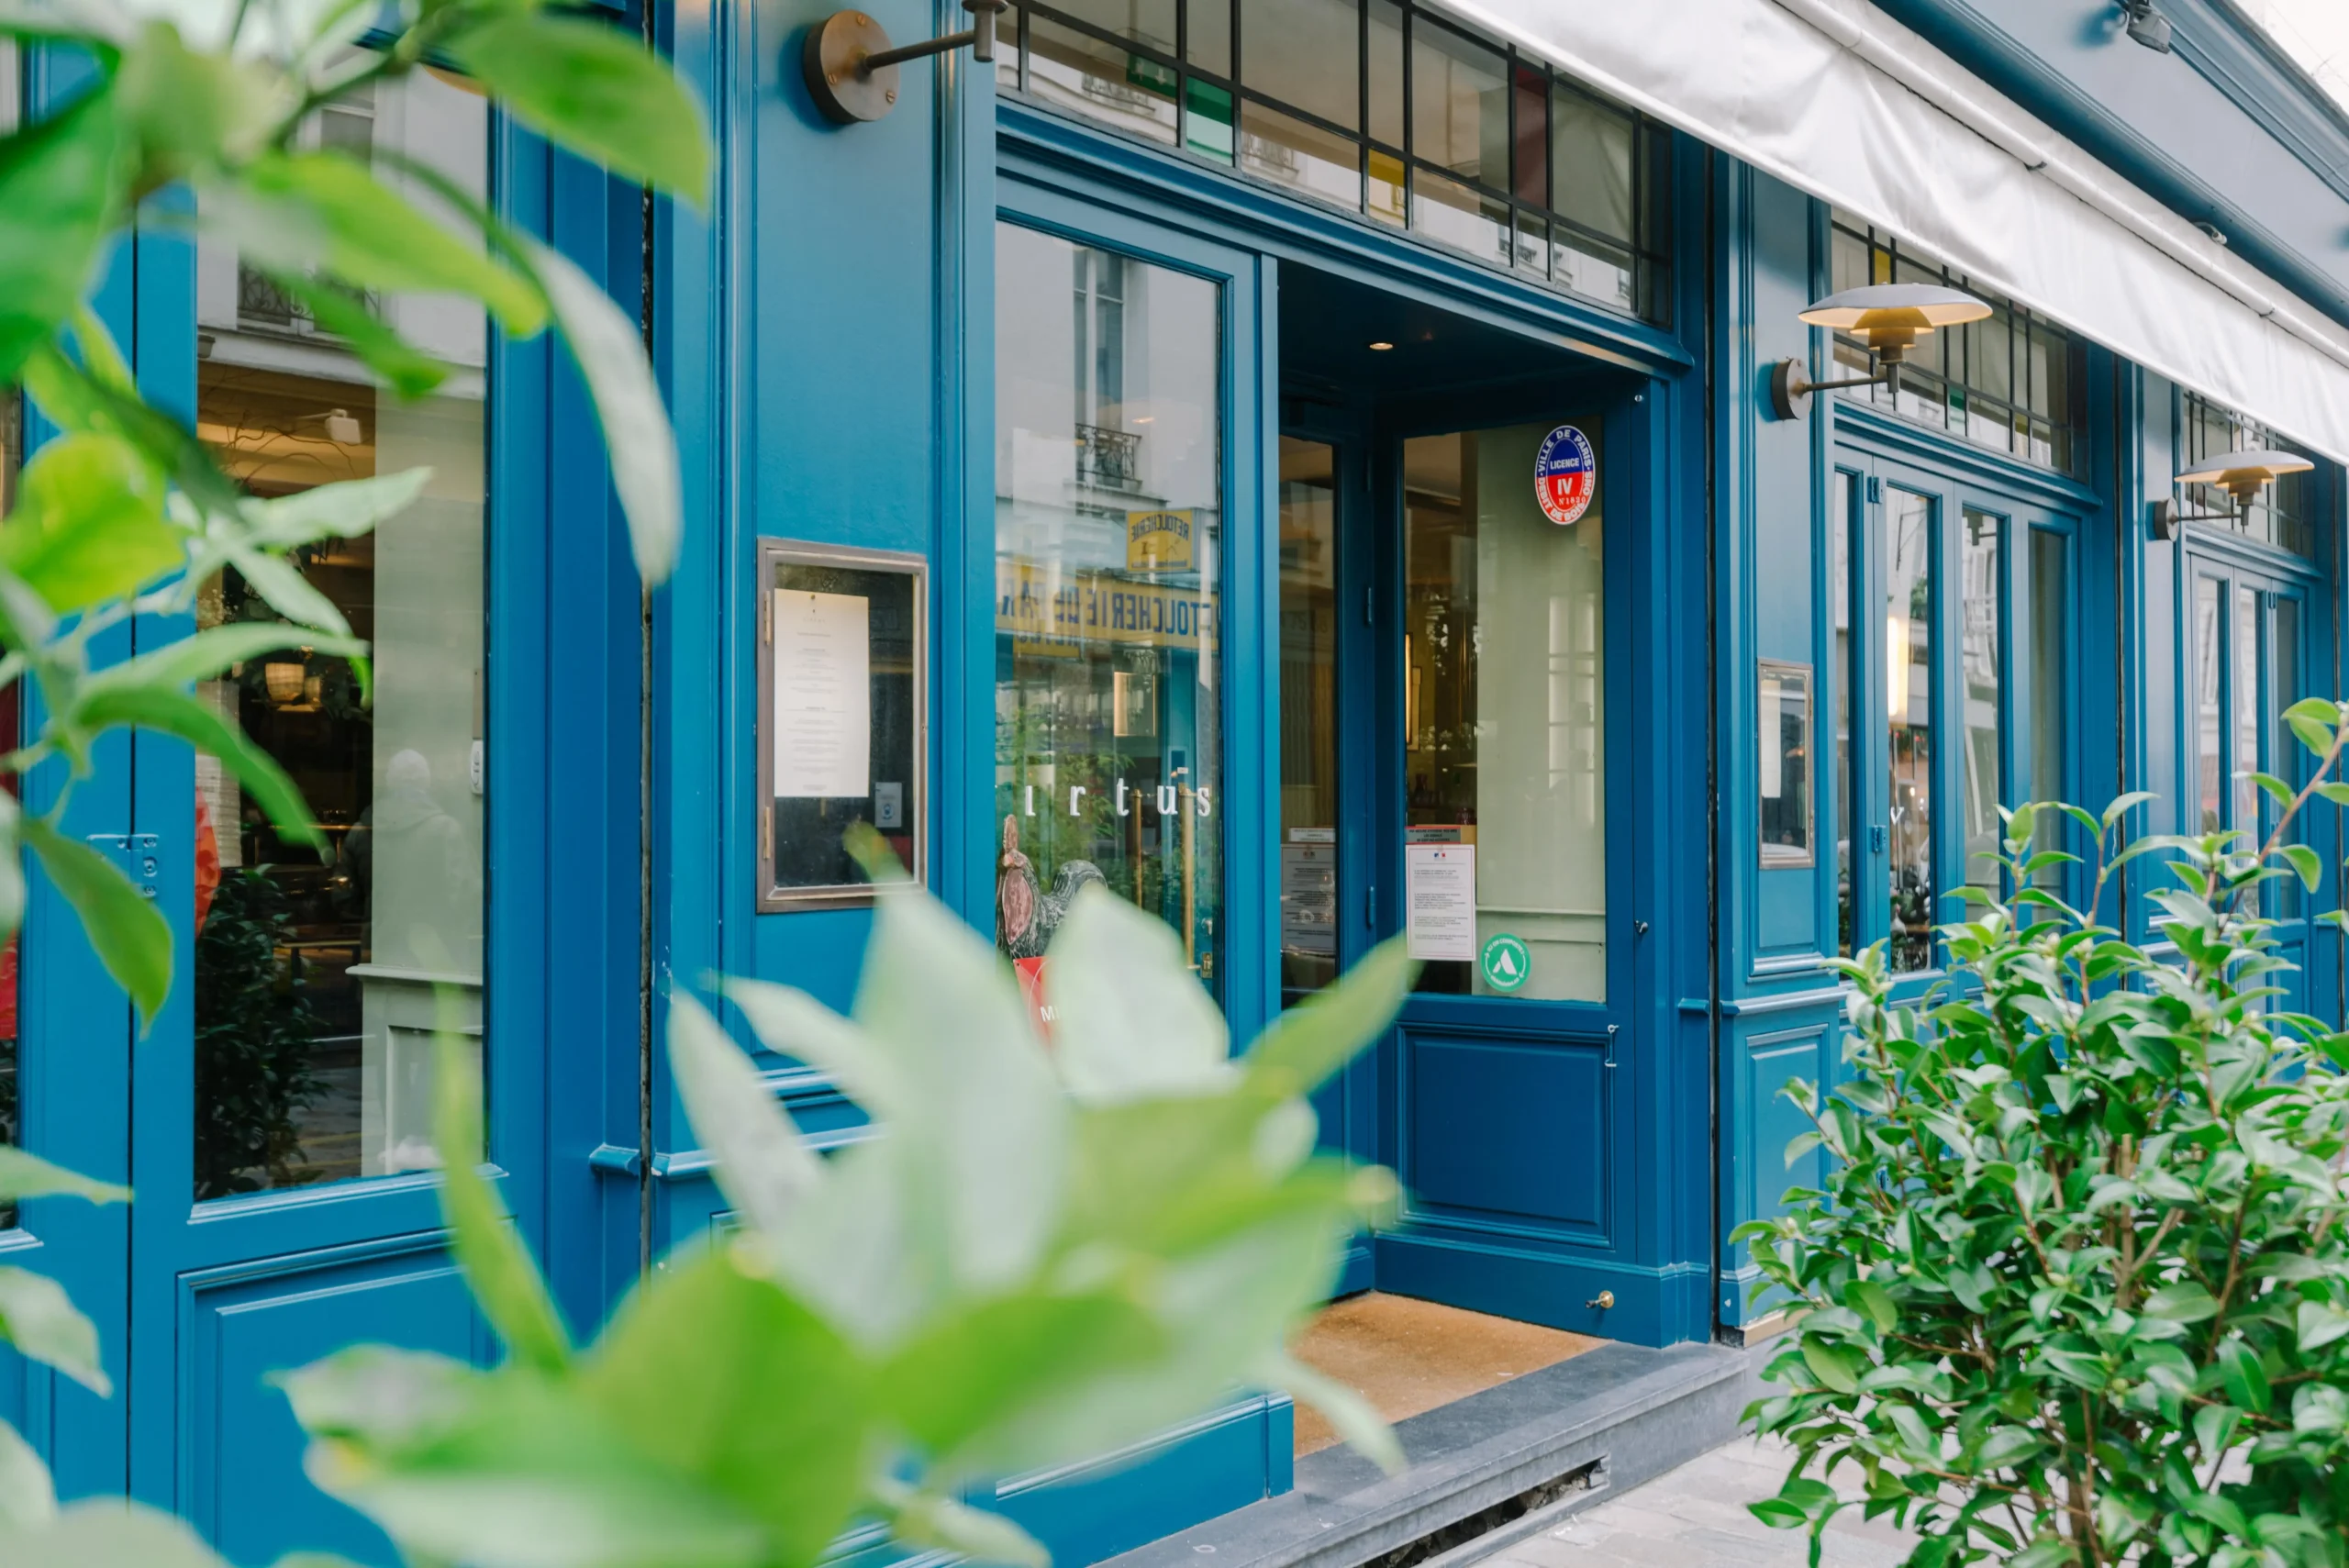 The charming blue facade of Virtus in Paris. It is recognized as best value Michelin restaurants Paris, invitingly opens to gourmet enthusiasts, framed by lush greenery in a vibrant street setting.